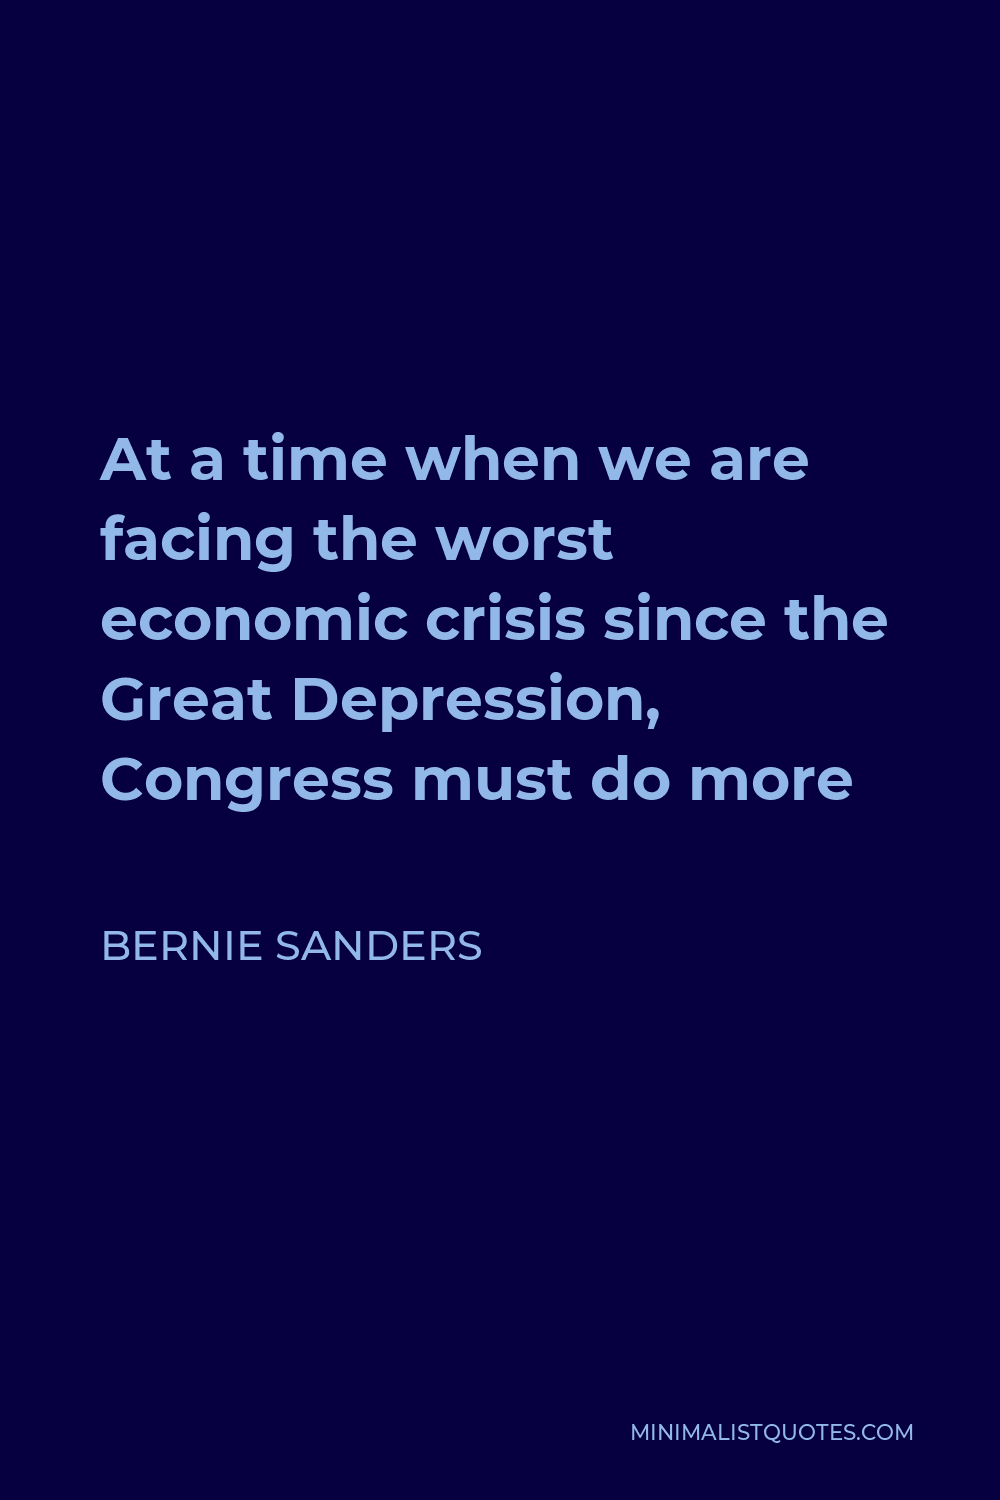 Bernie Sanders Quote - At a time when we are facing the worst economic crisis since the Great Depression, Congress must do more